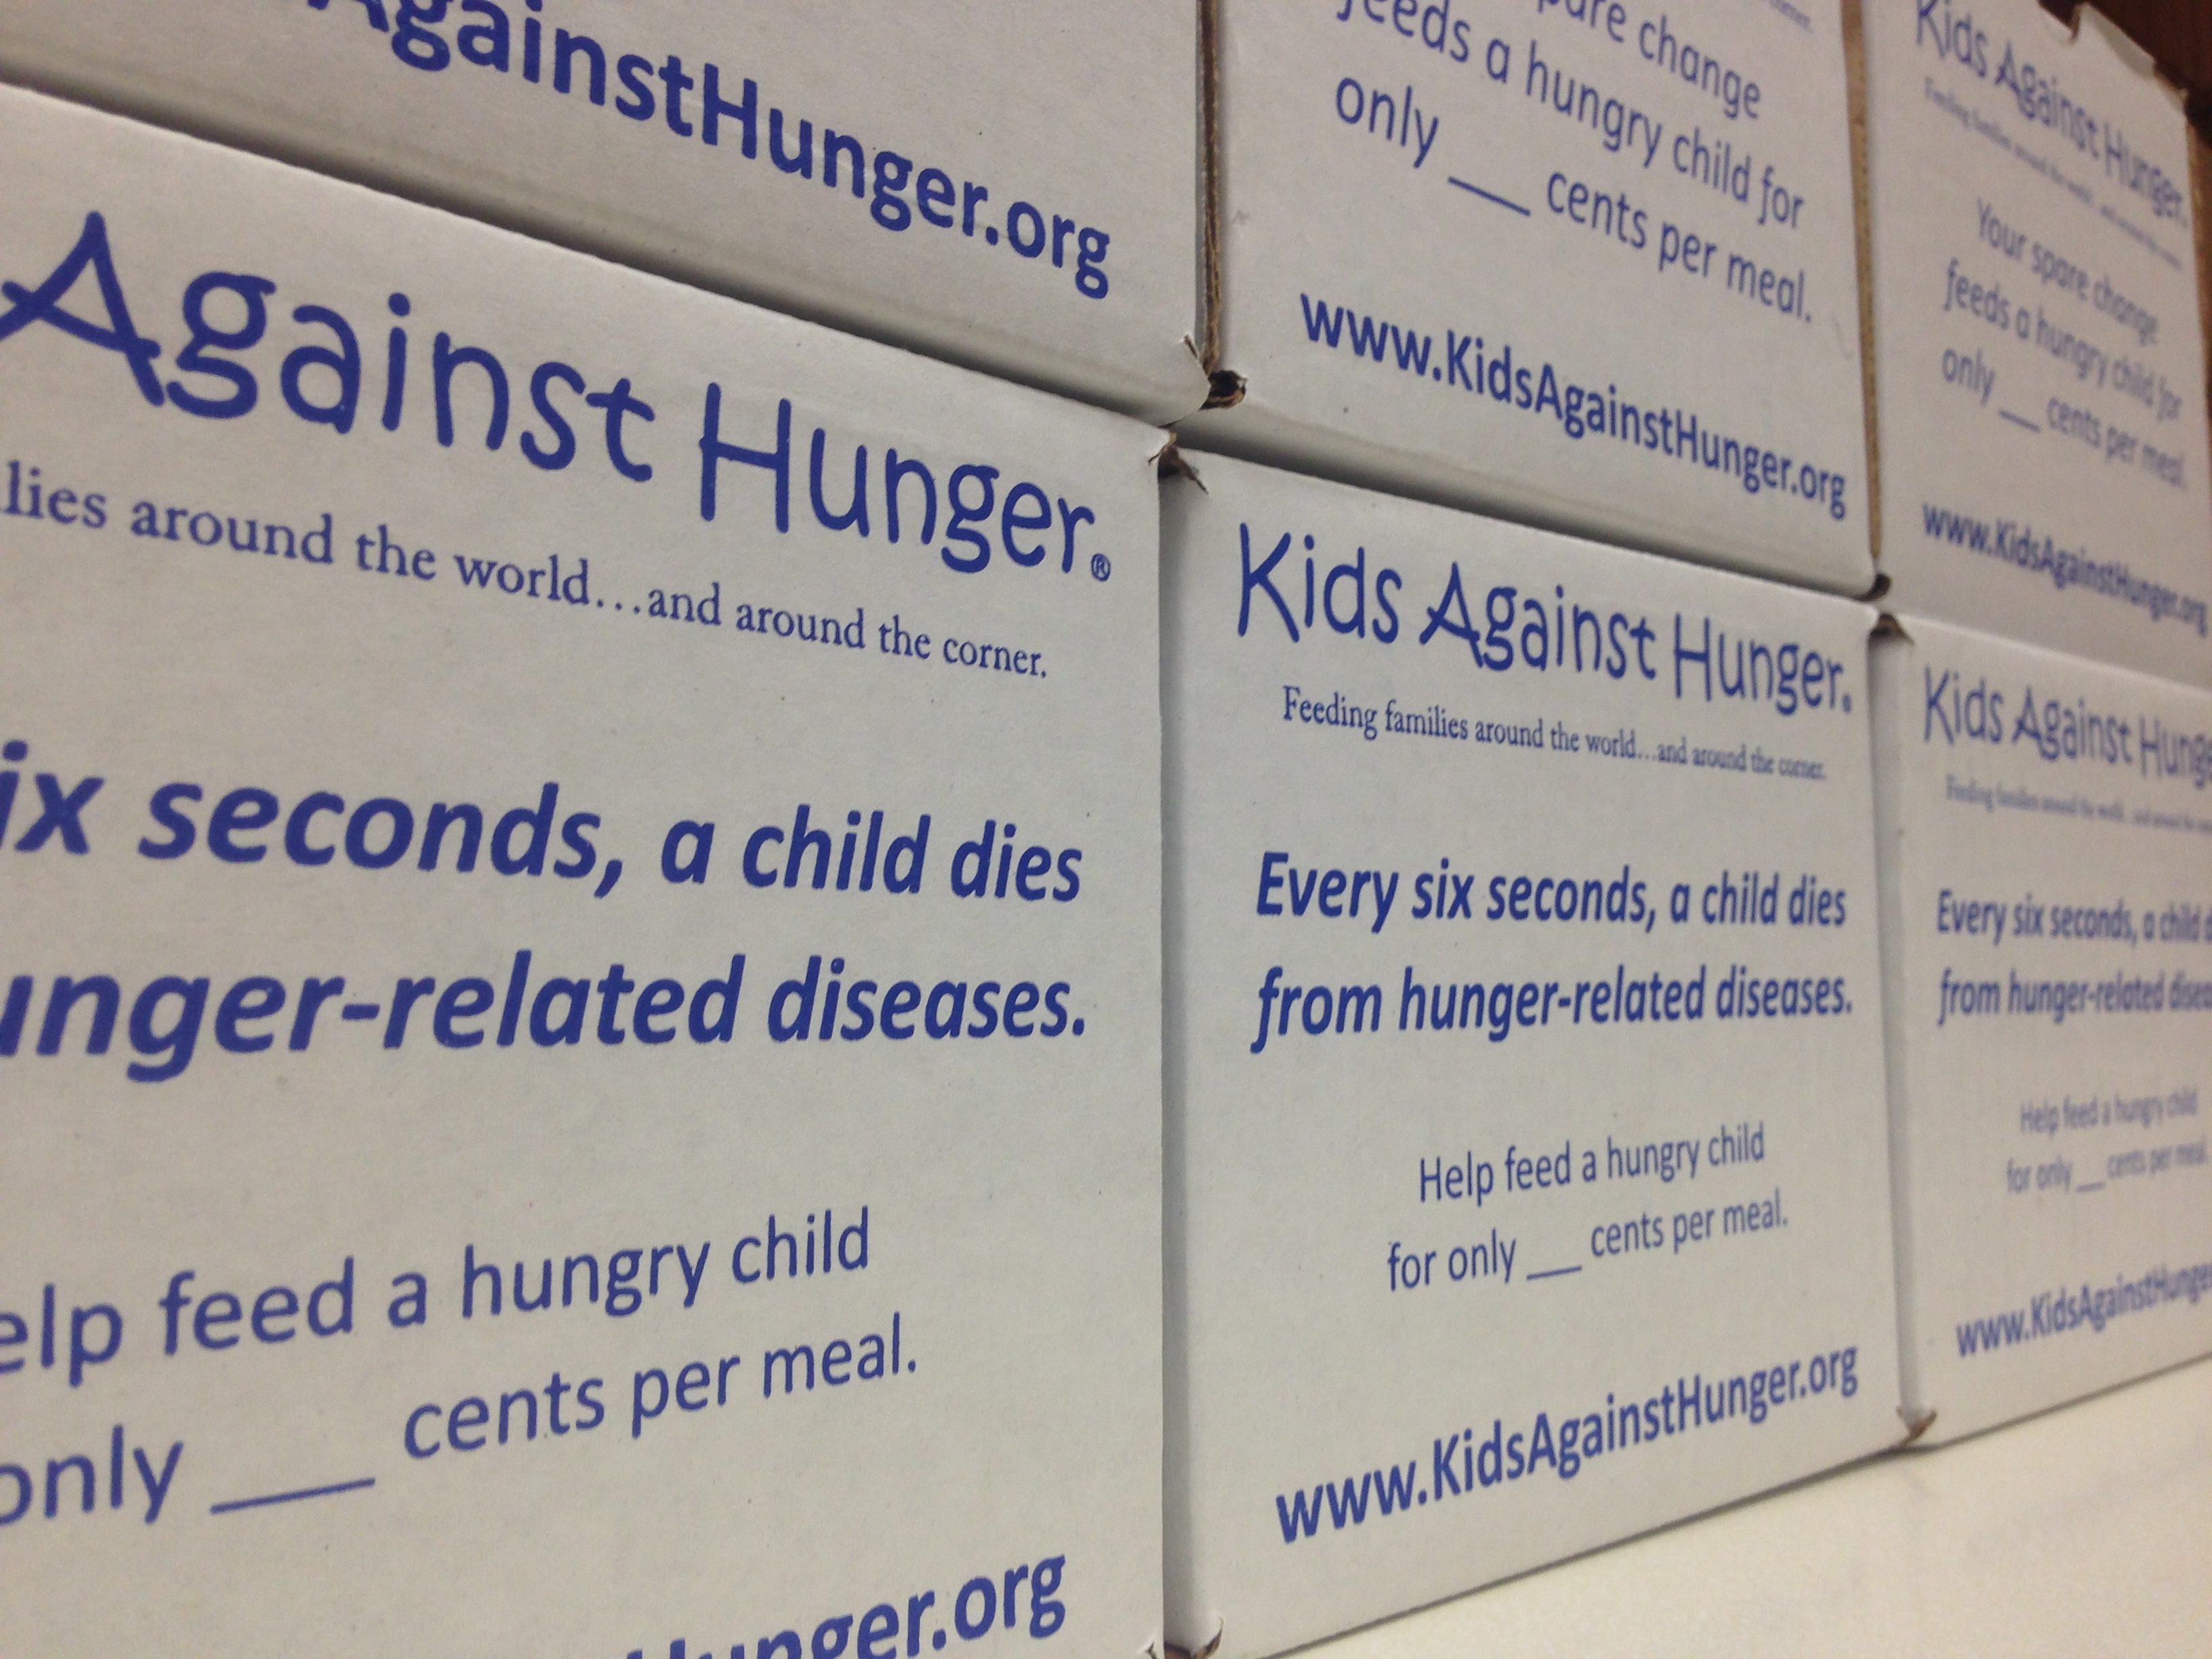 Kids Against Hunger fundraising containers were used for the latest Student Leadership project.  Students and parents may buy tickets for $6 at the door.  The dinner is on Feb. 26 in the DHS cafeteria at 5:30.